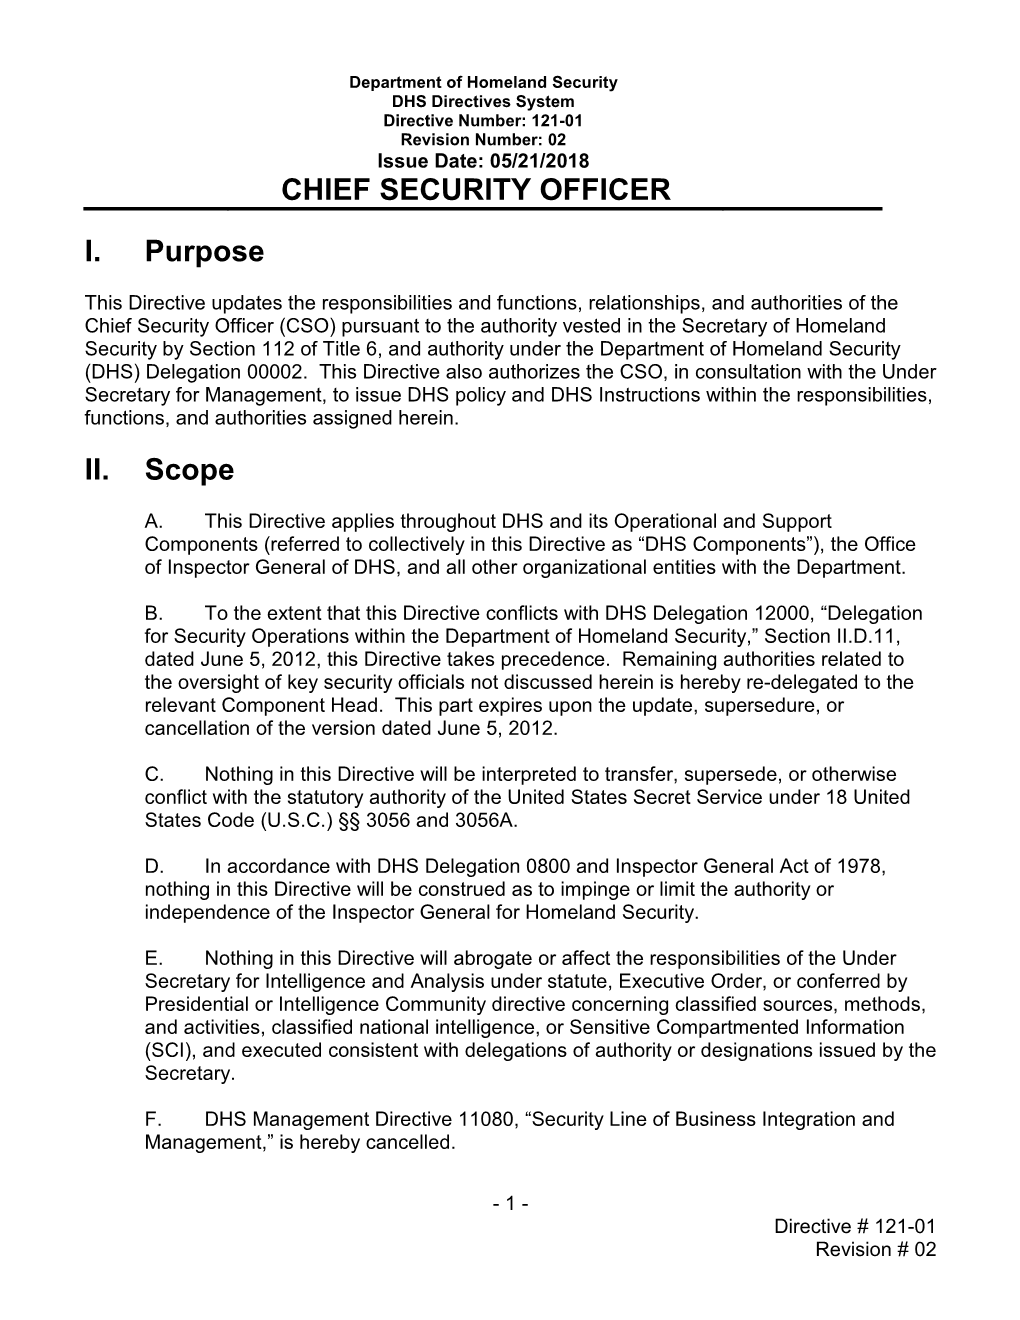 Office of the Chief Security Officer Policies and Authorities